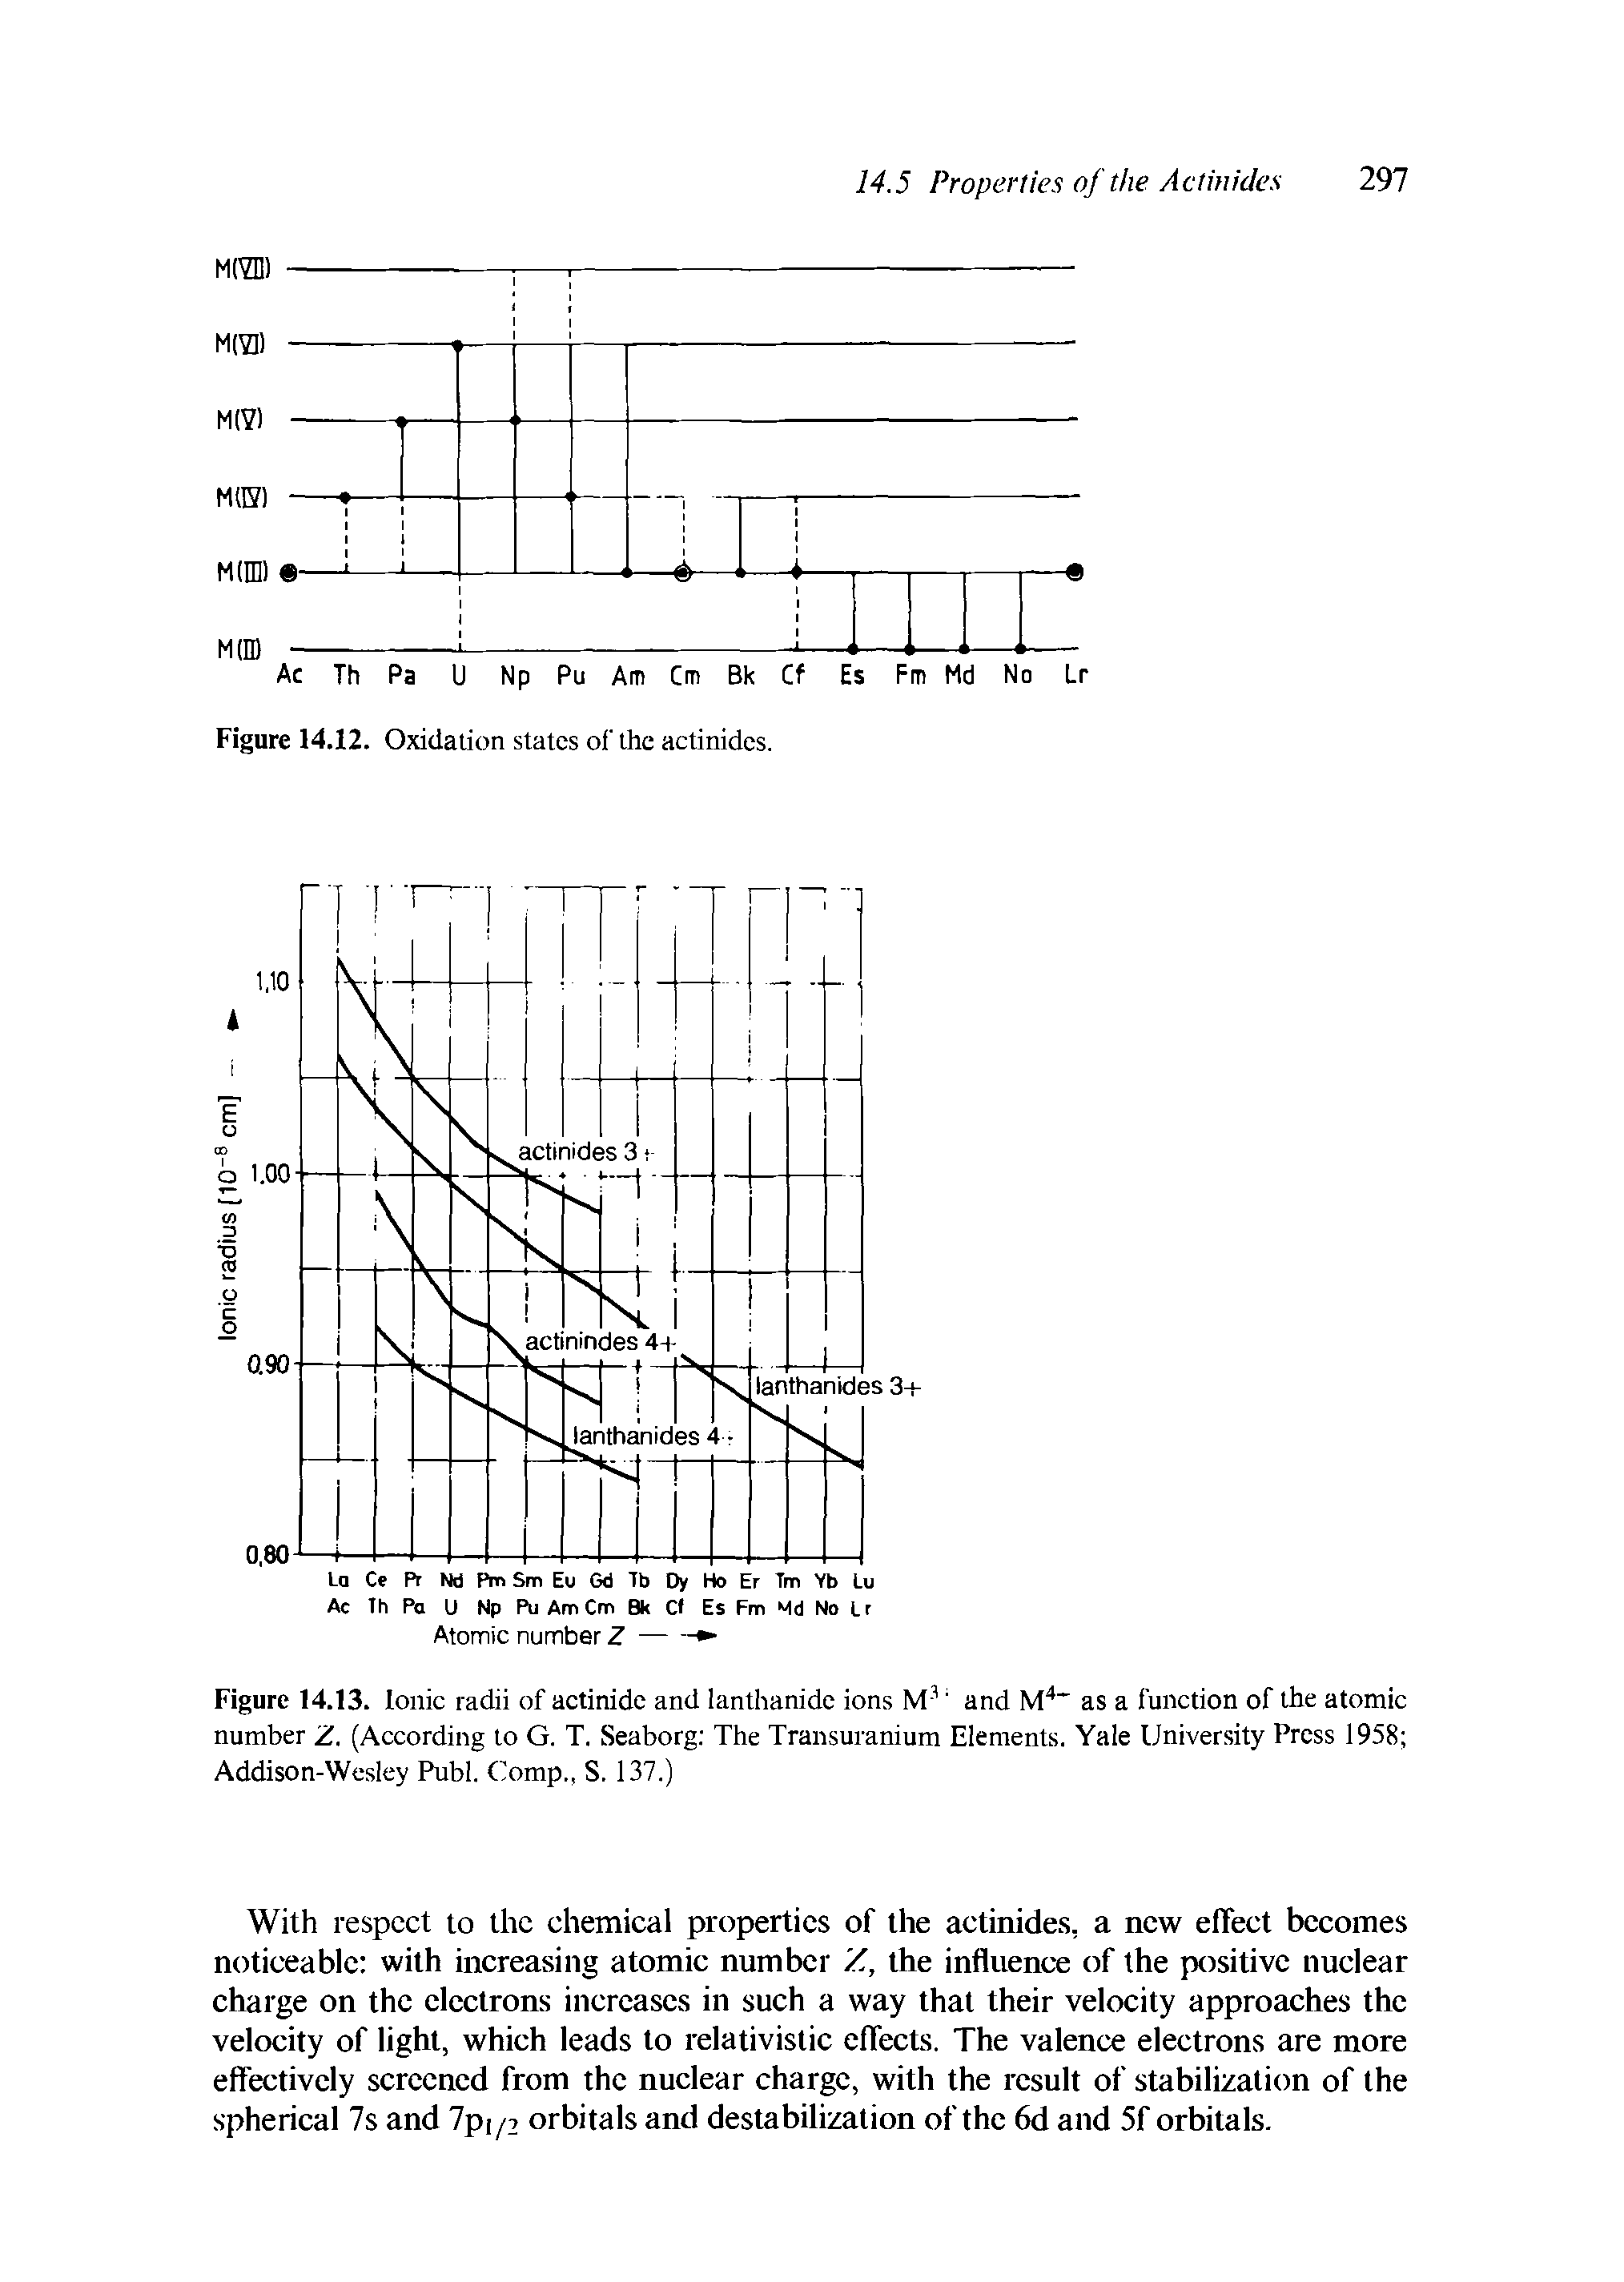 Figure 14.13. Ionic radii of actinide and lanthanide ions M- and M " as a function of the atomic number Z. (According to G. T. Seaborg The Transuranium Elements. Yale University Press 1958 Addison-Wesley Publ. Comp., S. 137.)...